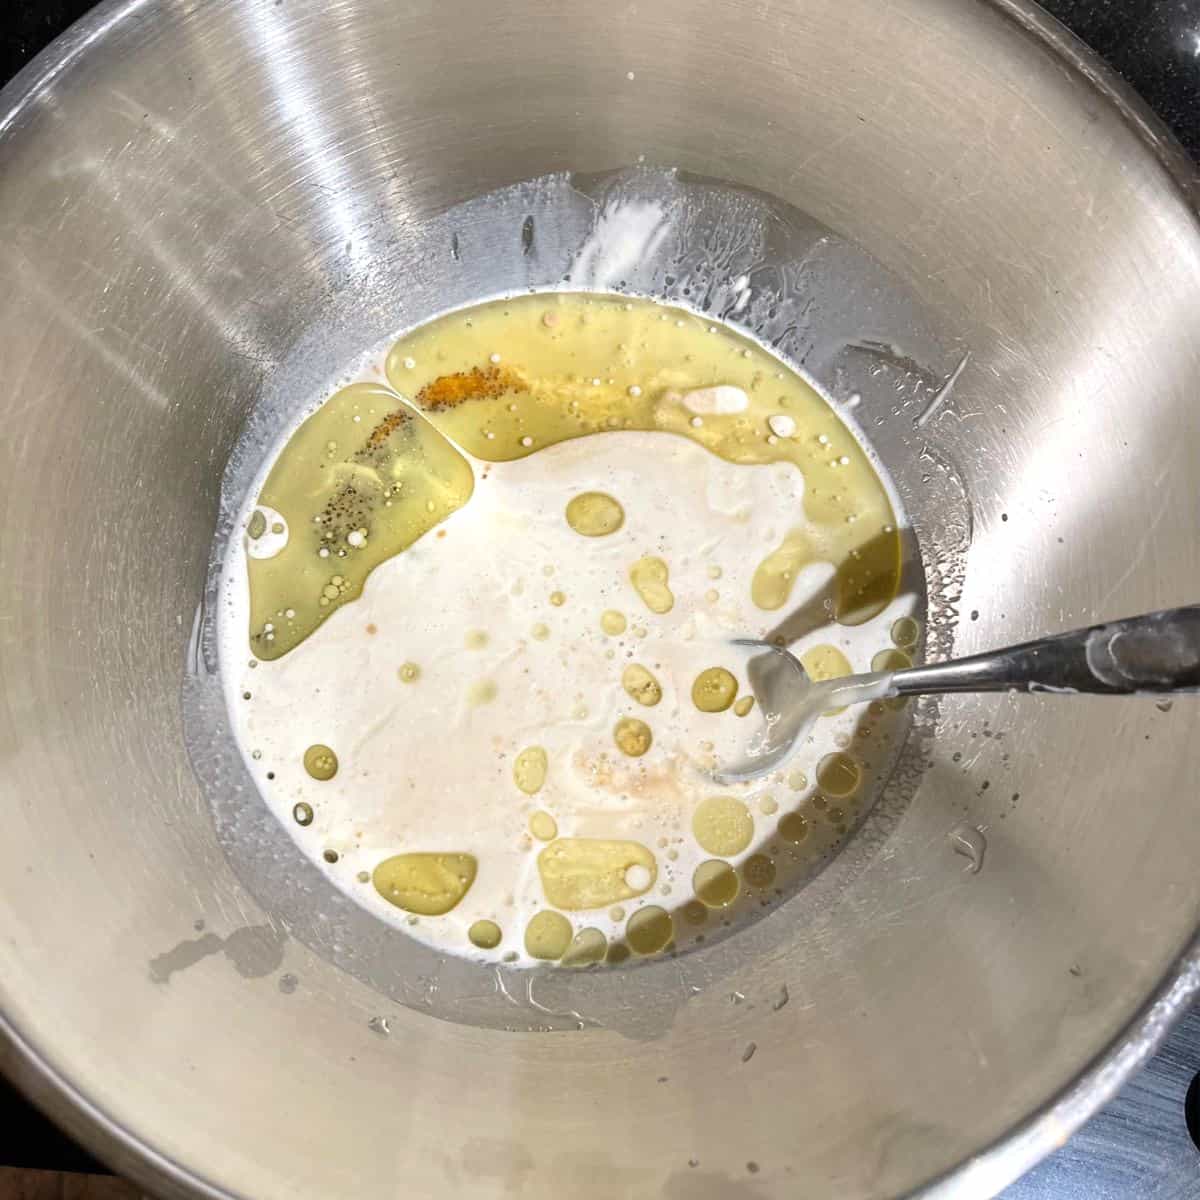 Sourdough starter, oil and other ingredients in bowl.